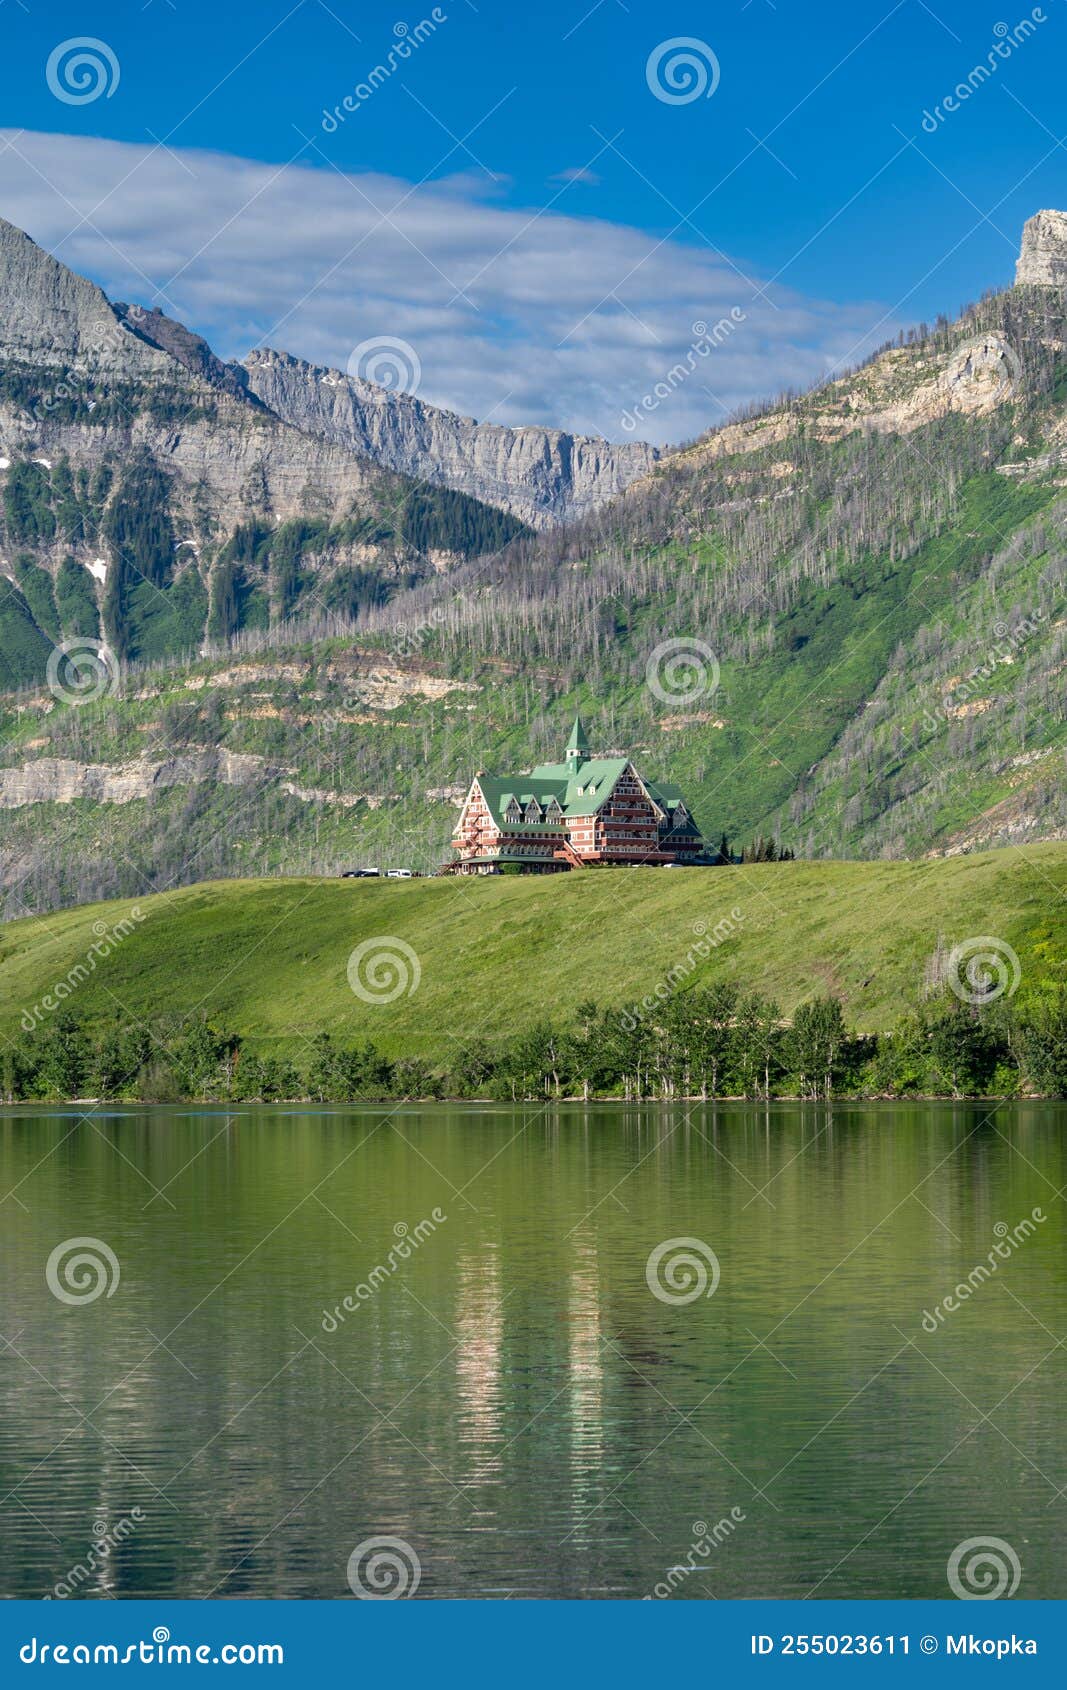 waterton lakes national park canada with the iconic hotel in photo